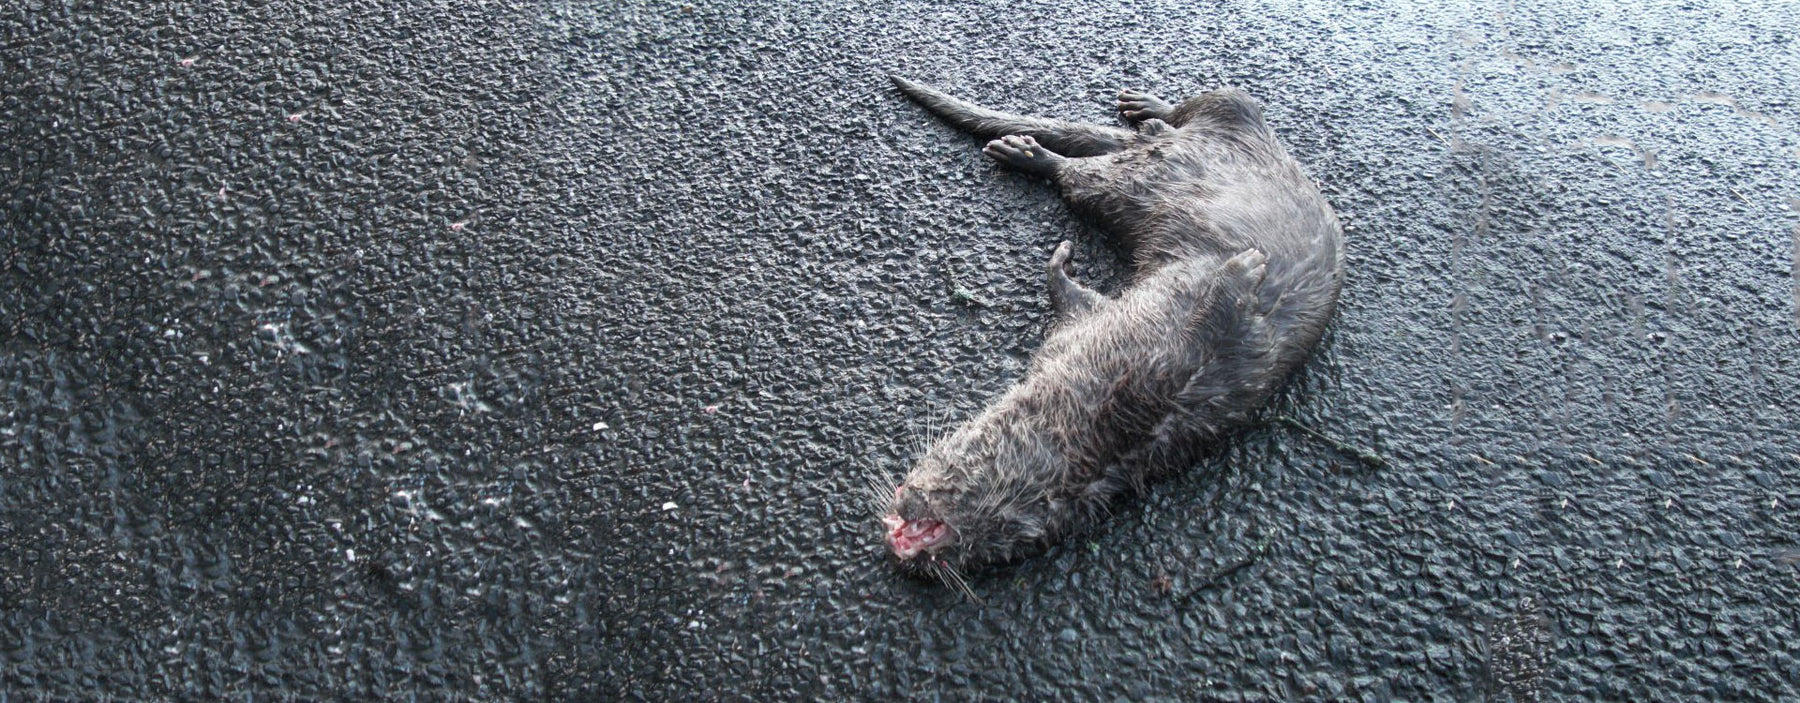 Otter killed on the road